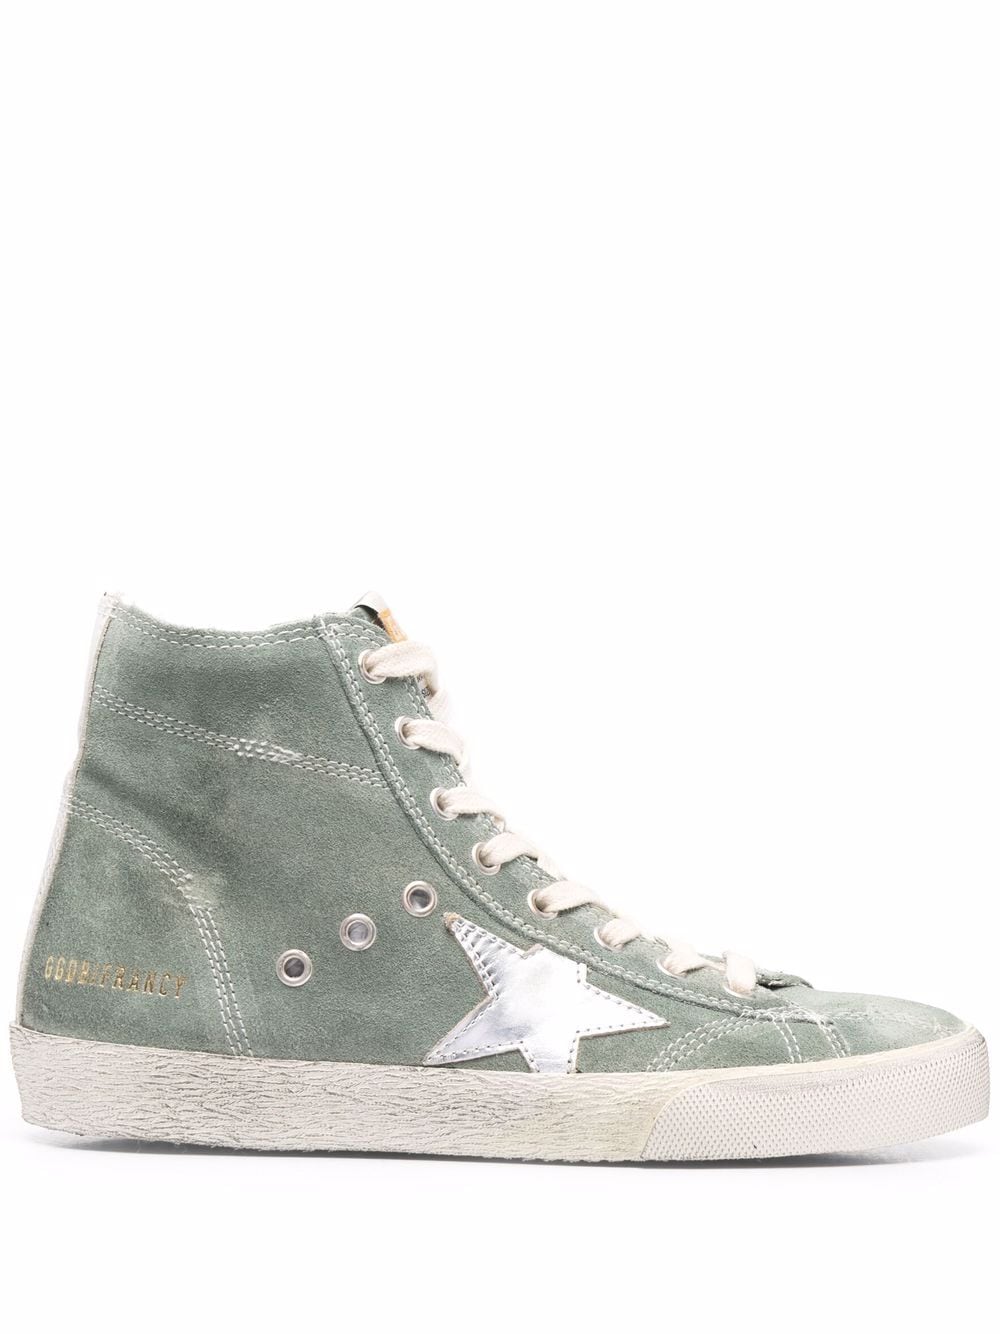 Golden Goose Francy Sneakers Military Green | Fashion Clinic